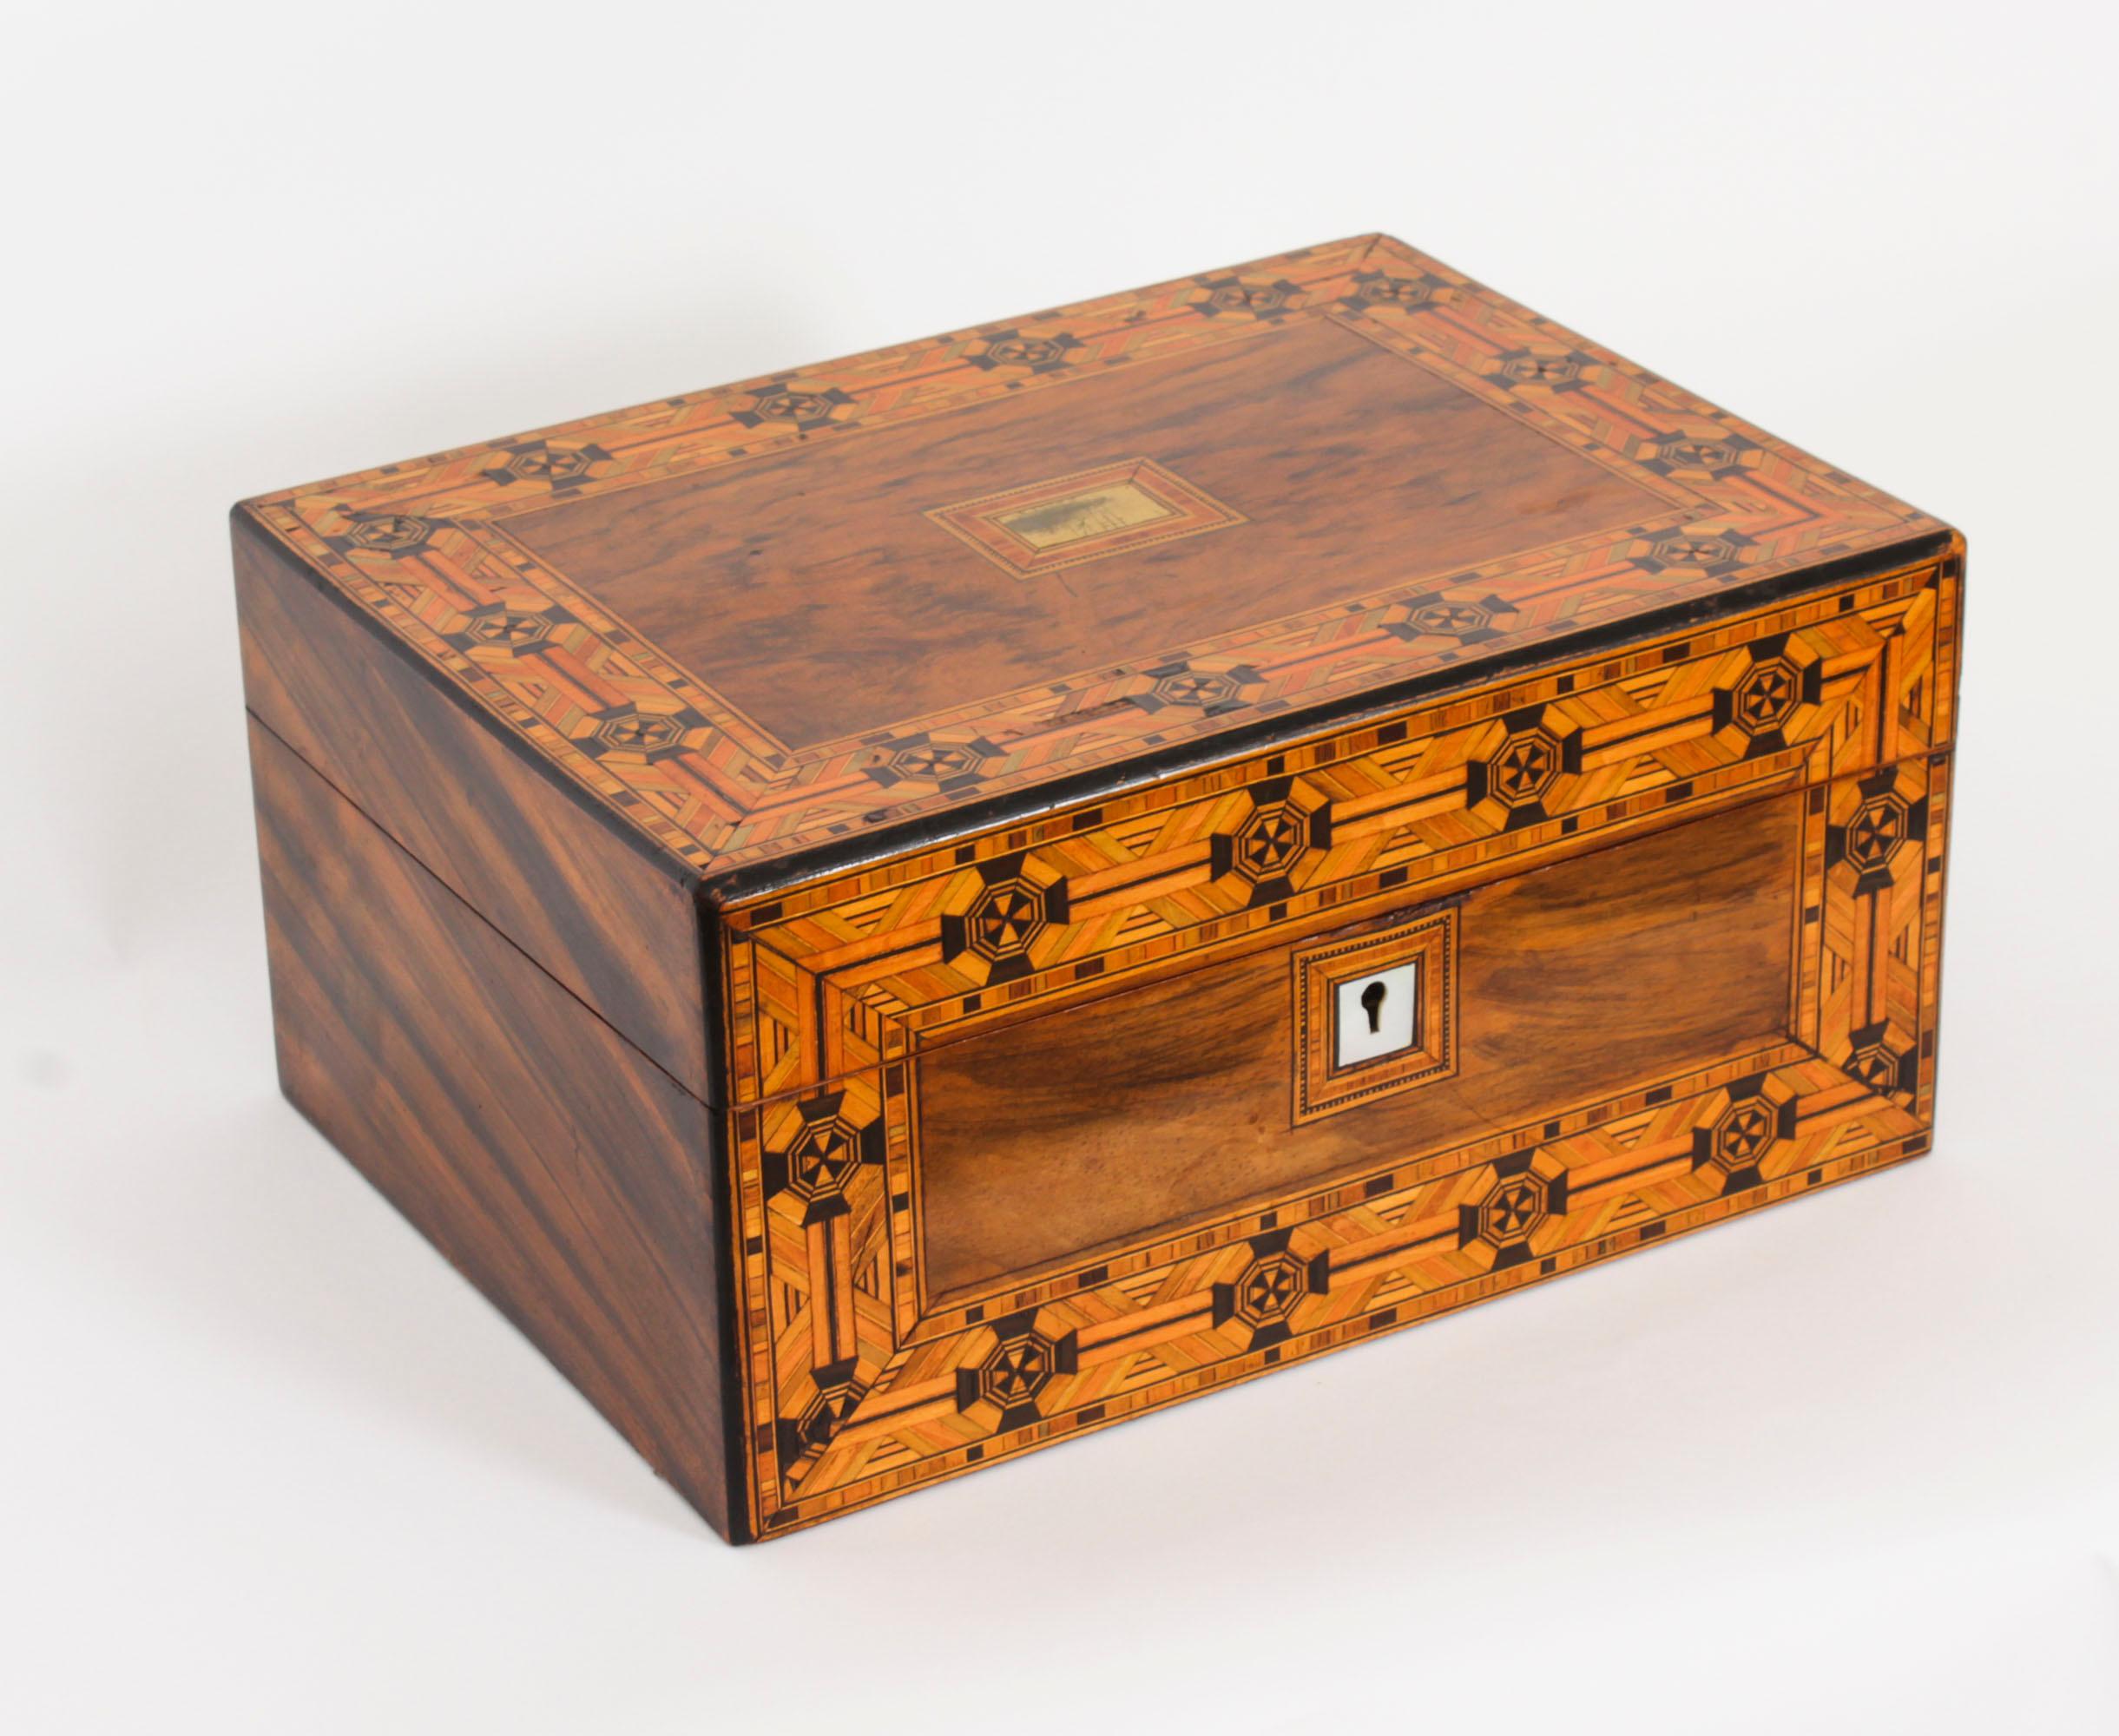 An Antique English Victorian inlaid tunbridge walnut jewellery casket, circa 1880 in date.

This splendid burr walnut casket is rectangular in shape and features luxurious tunbridge ware inlaid decoration.  The interior is lined with an Art Nouveau